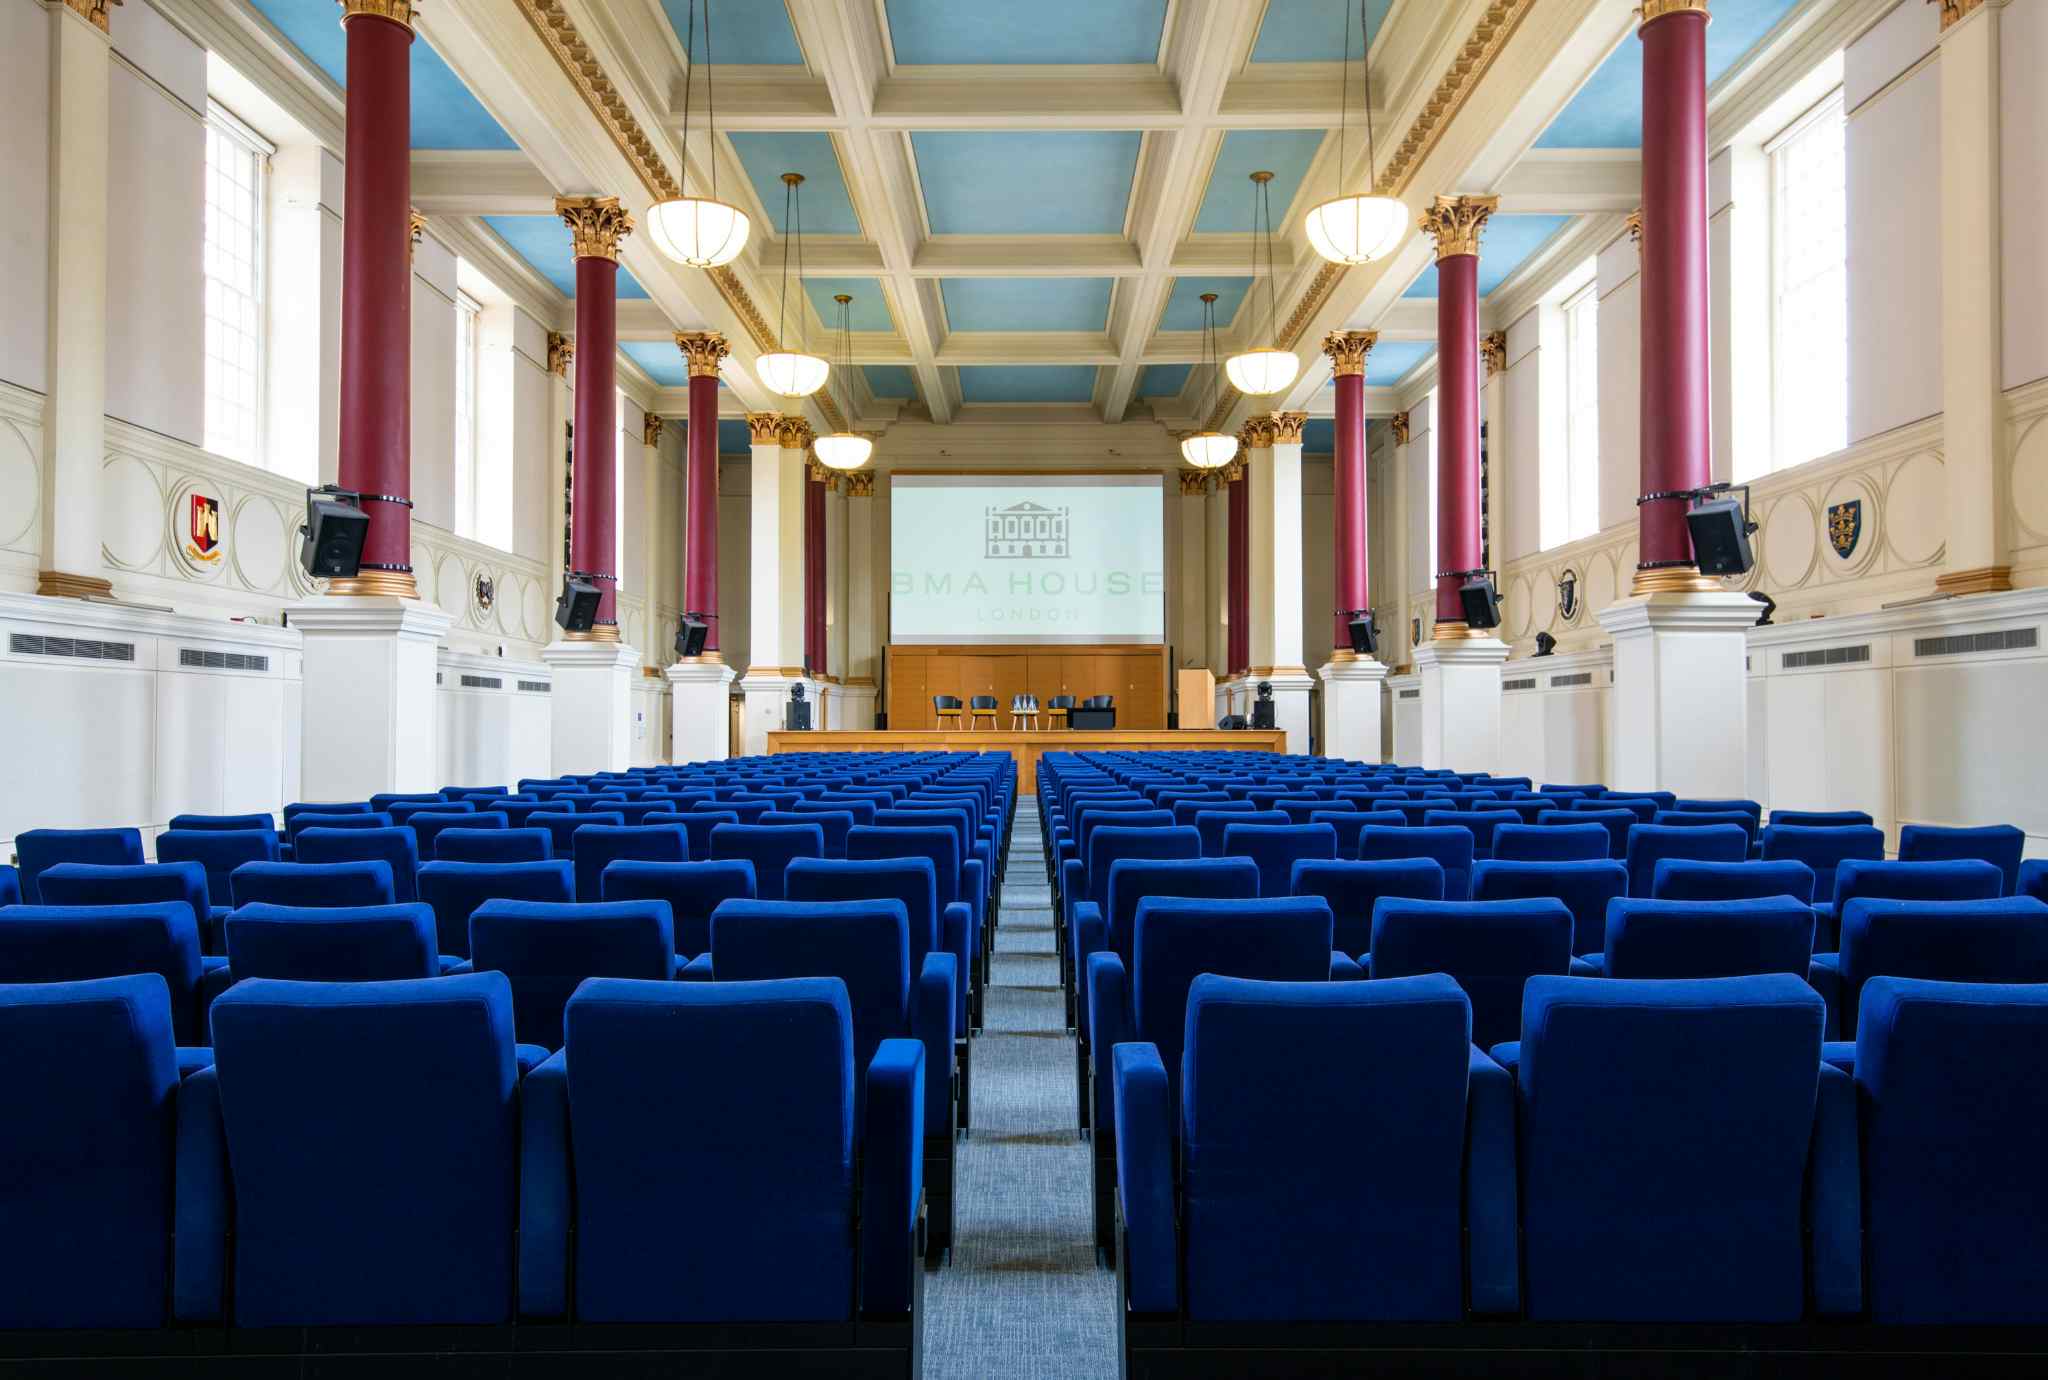 Great Hall, BMA House